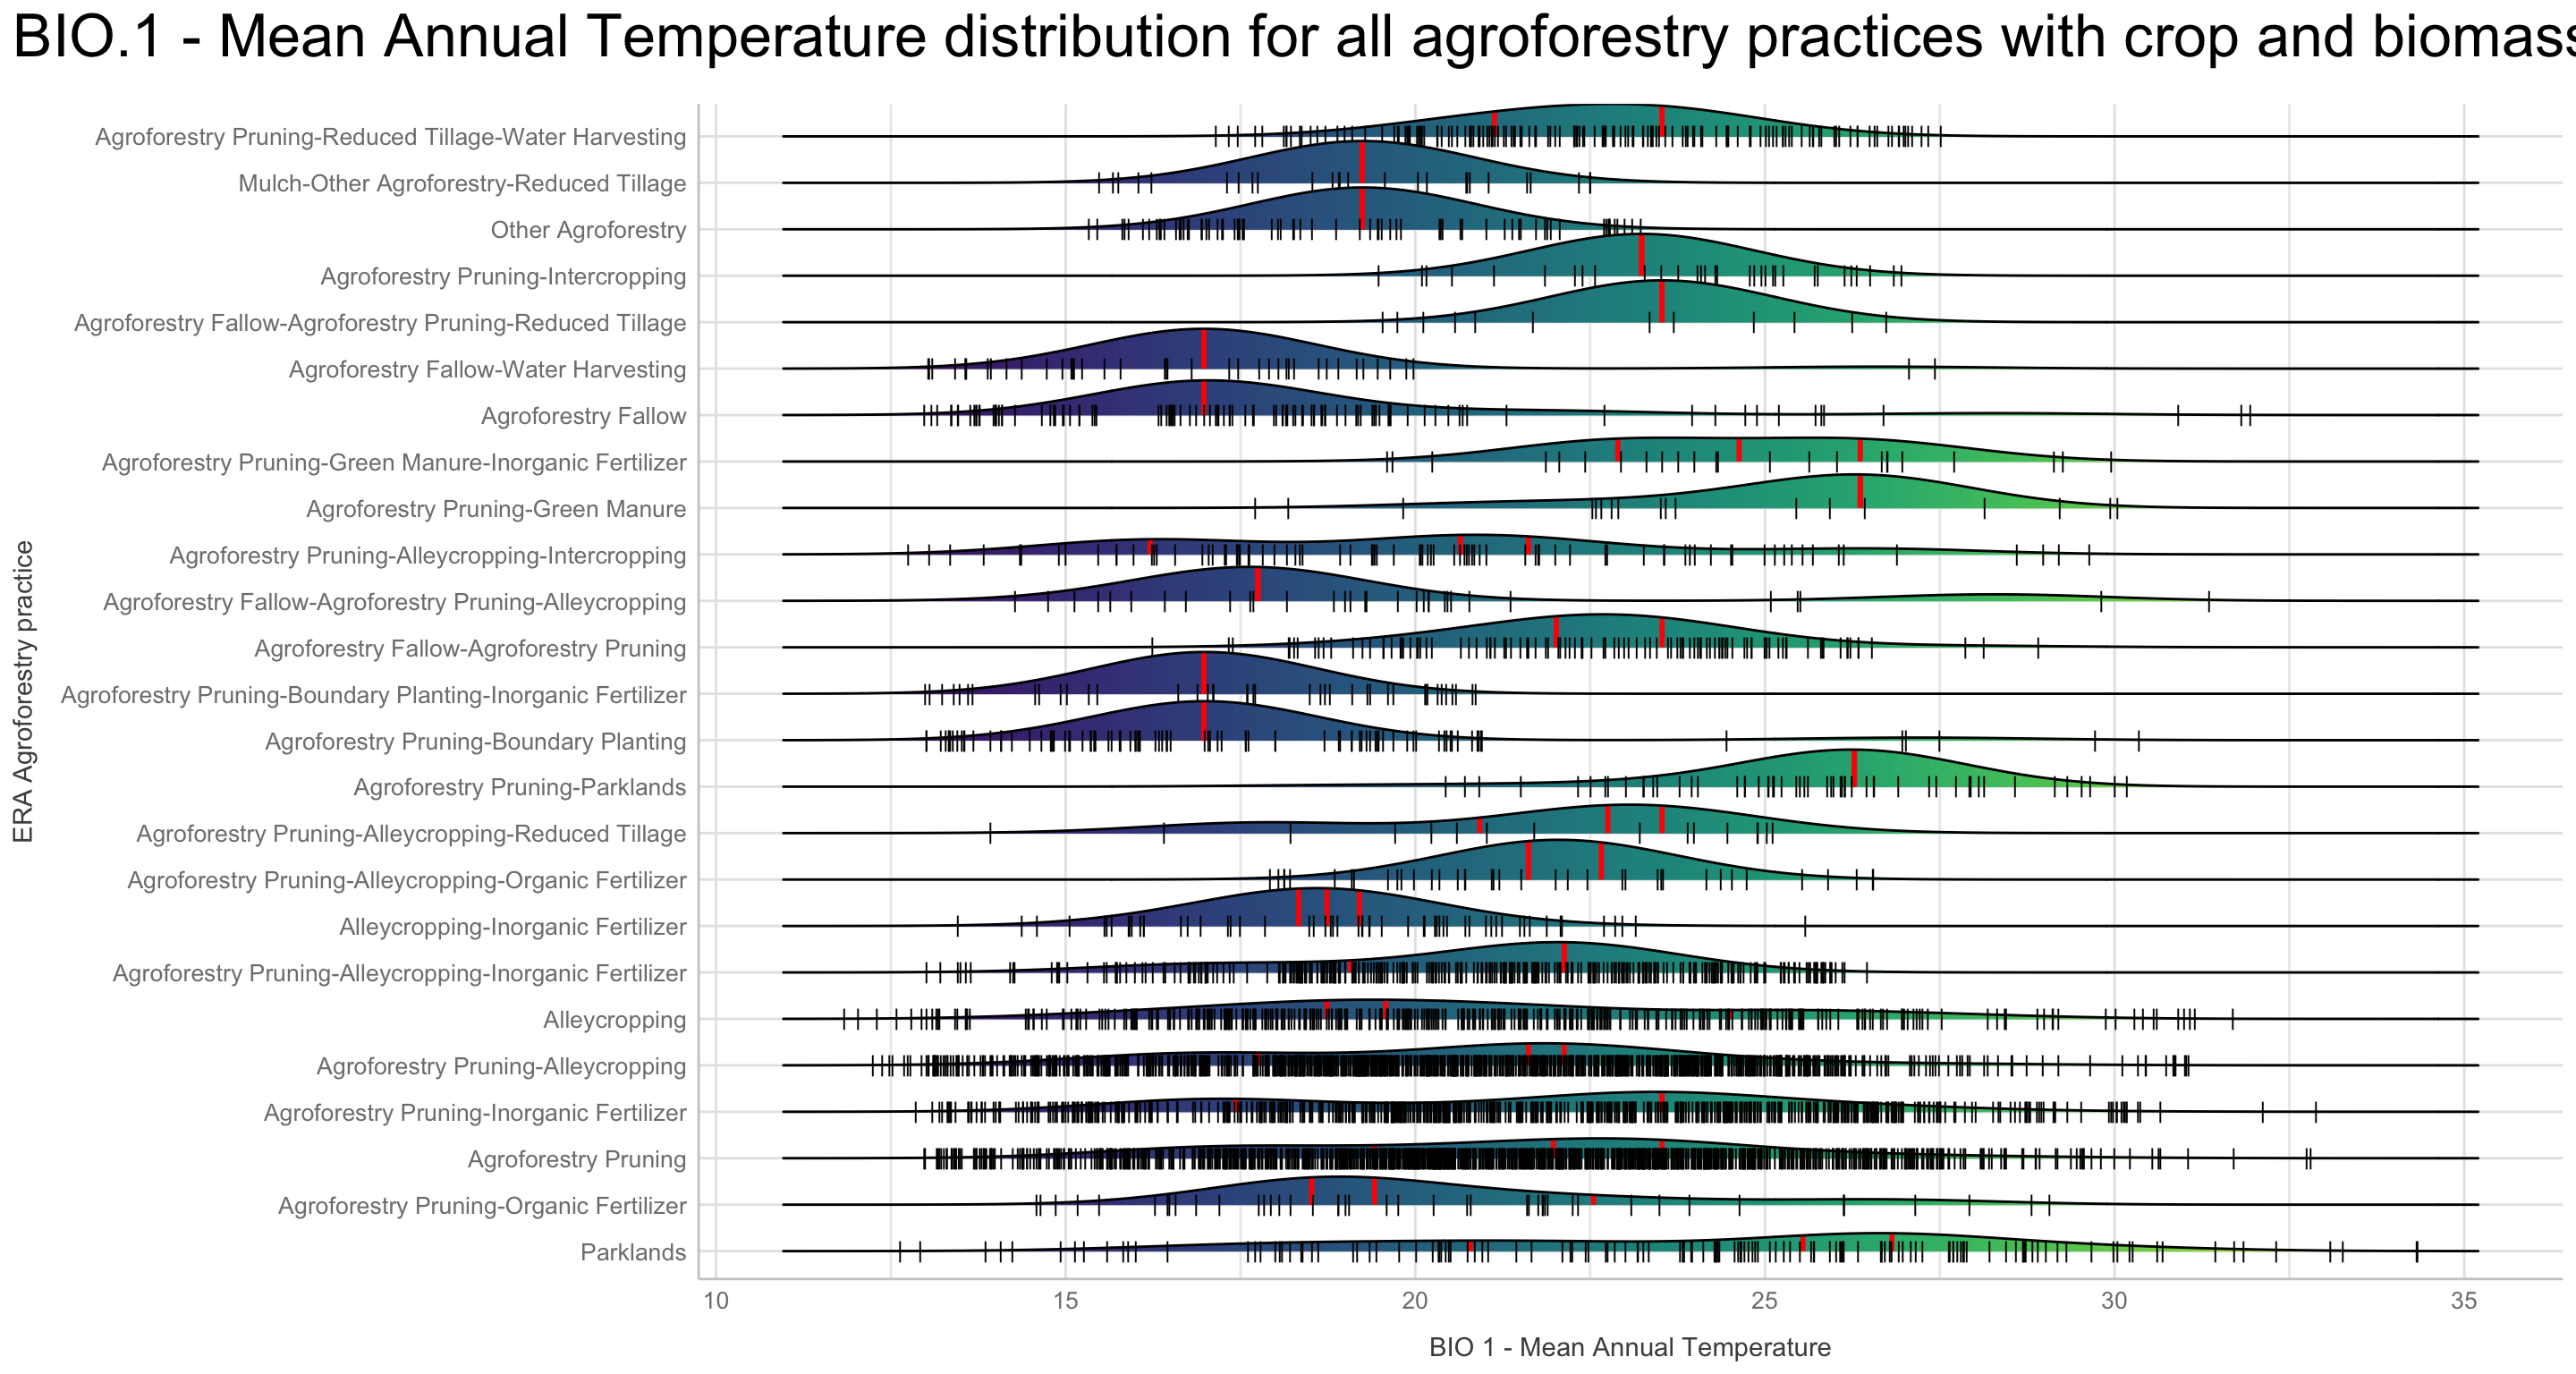 Density ridge plot for BIO.01 Mean Annual Temperature distribution across all agroforestry practices